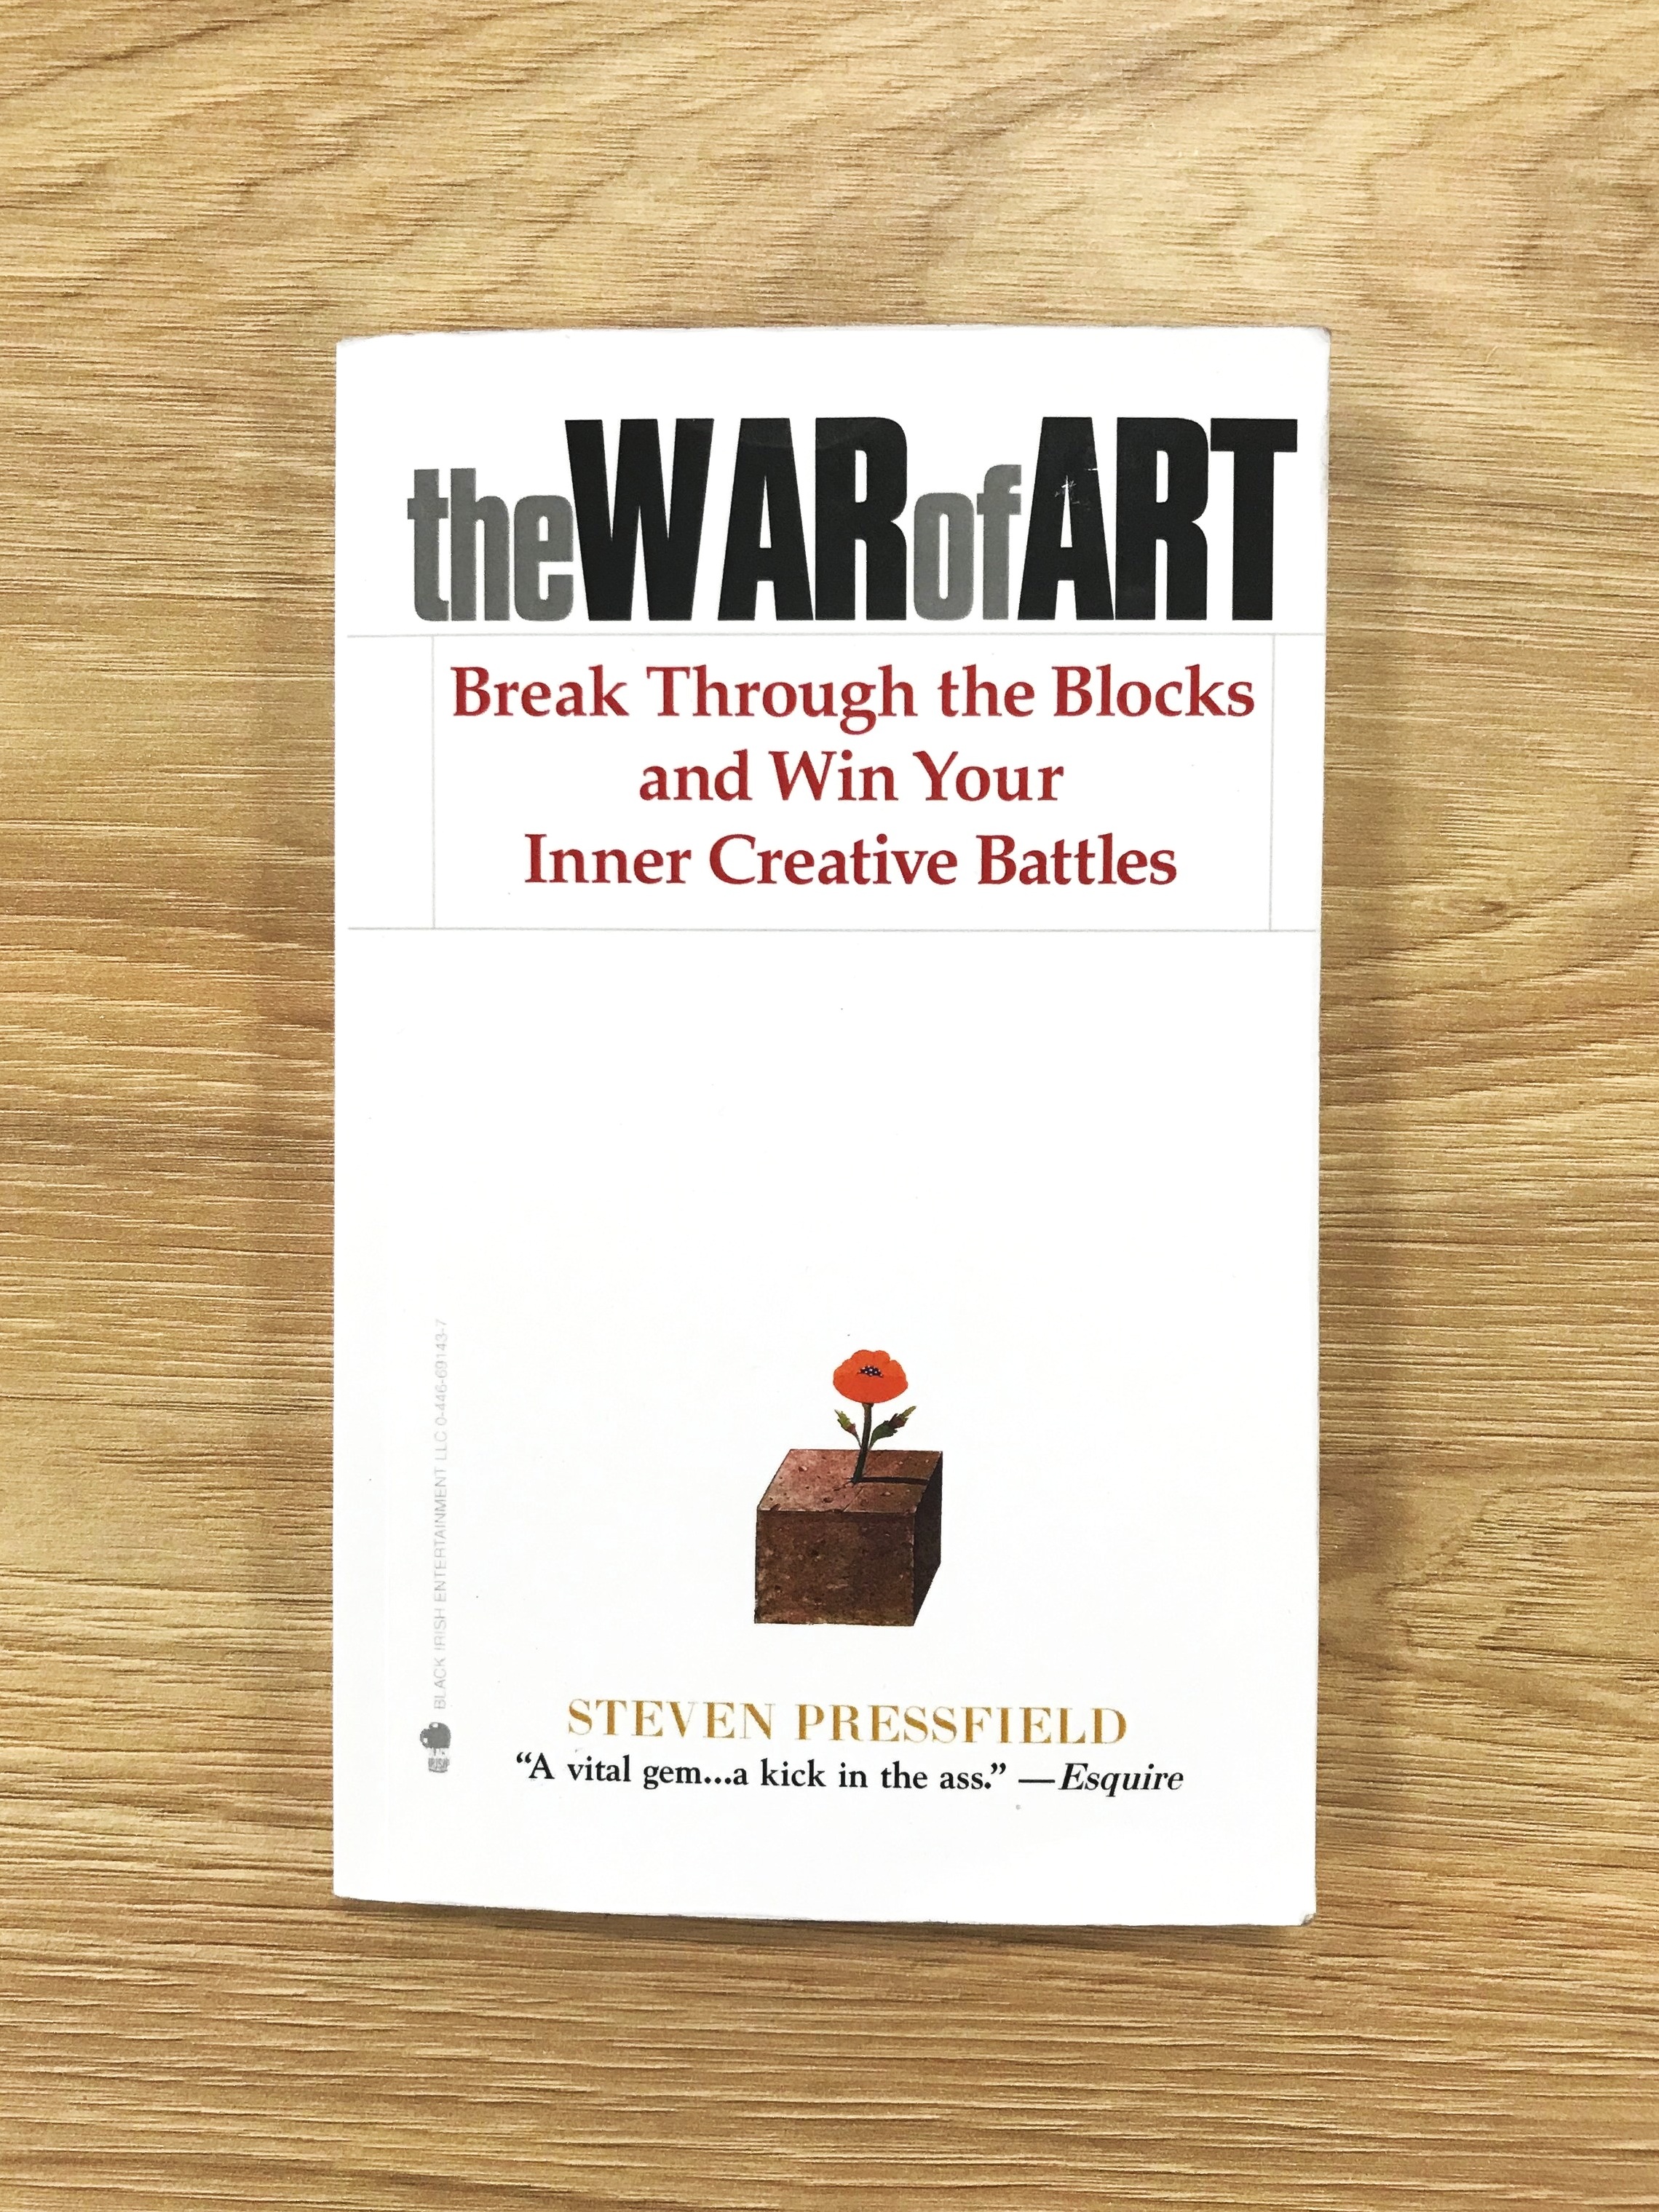 The War of Art by Steven Pressfield: A Book Review — By Ramona